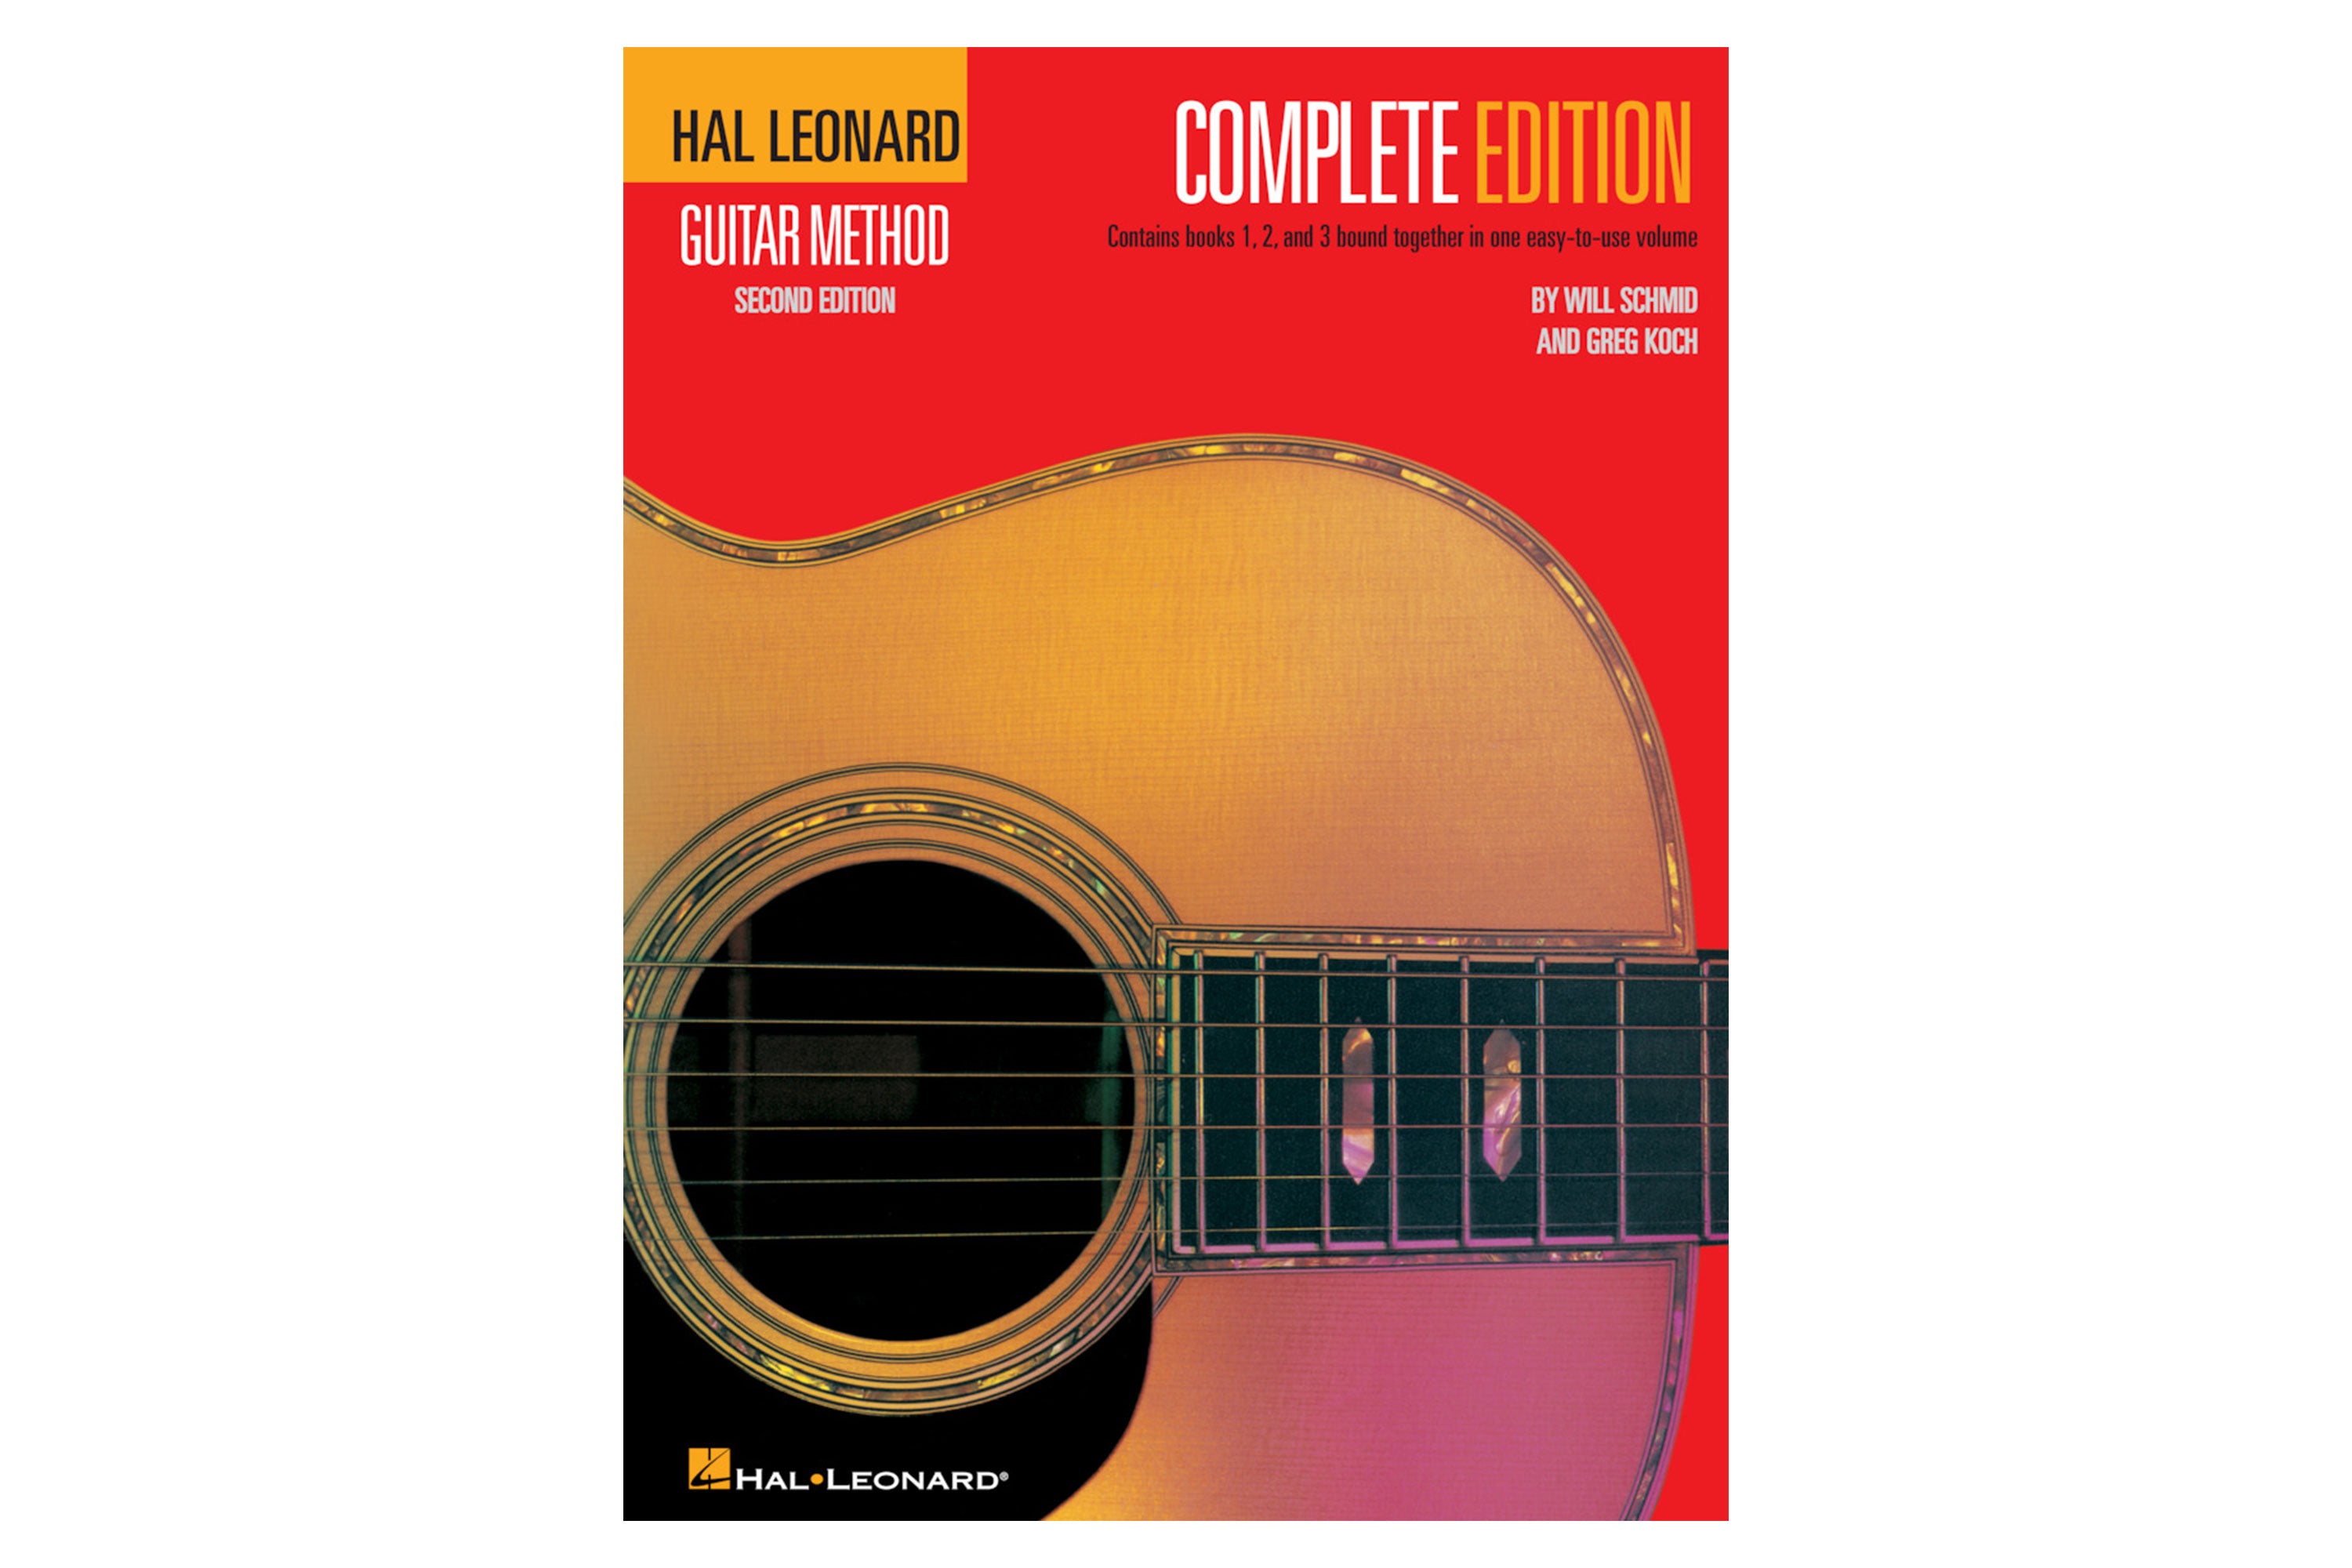 Hal Leonard Guitar Method Complete Edition - Terry Carter Music Store